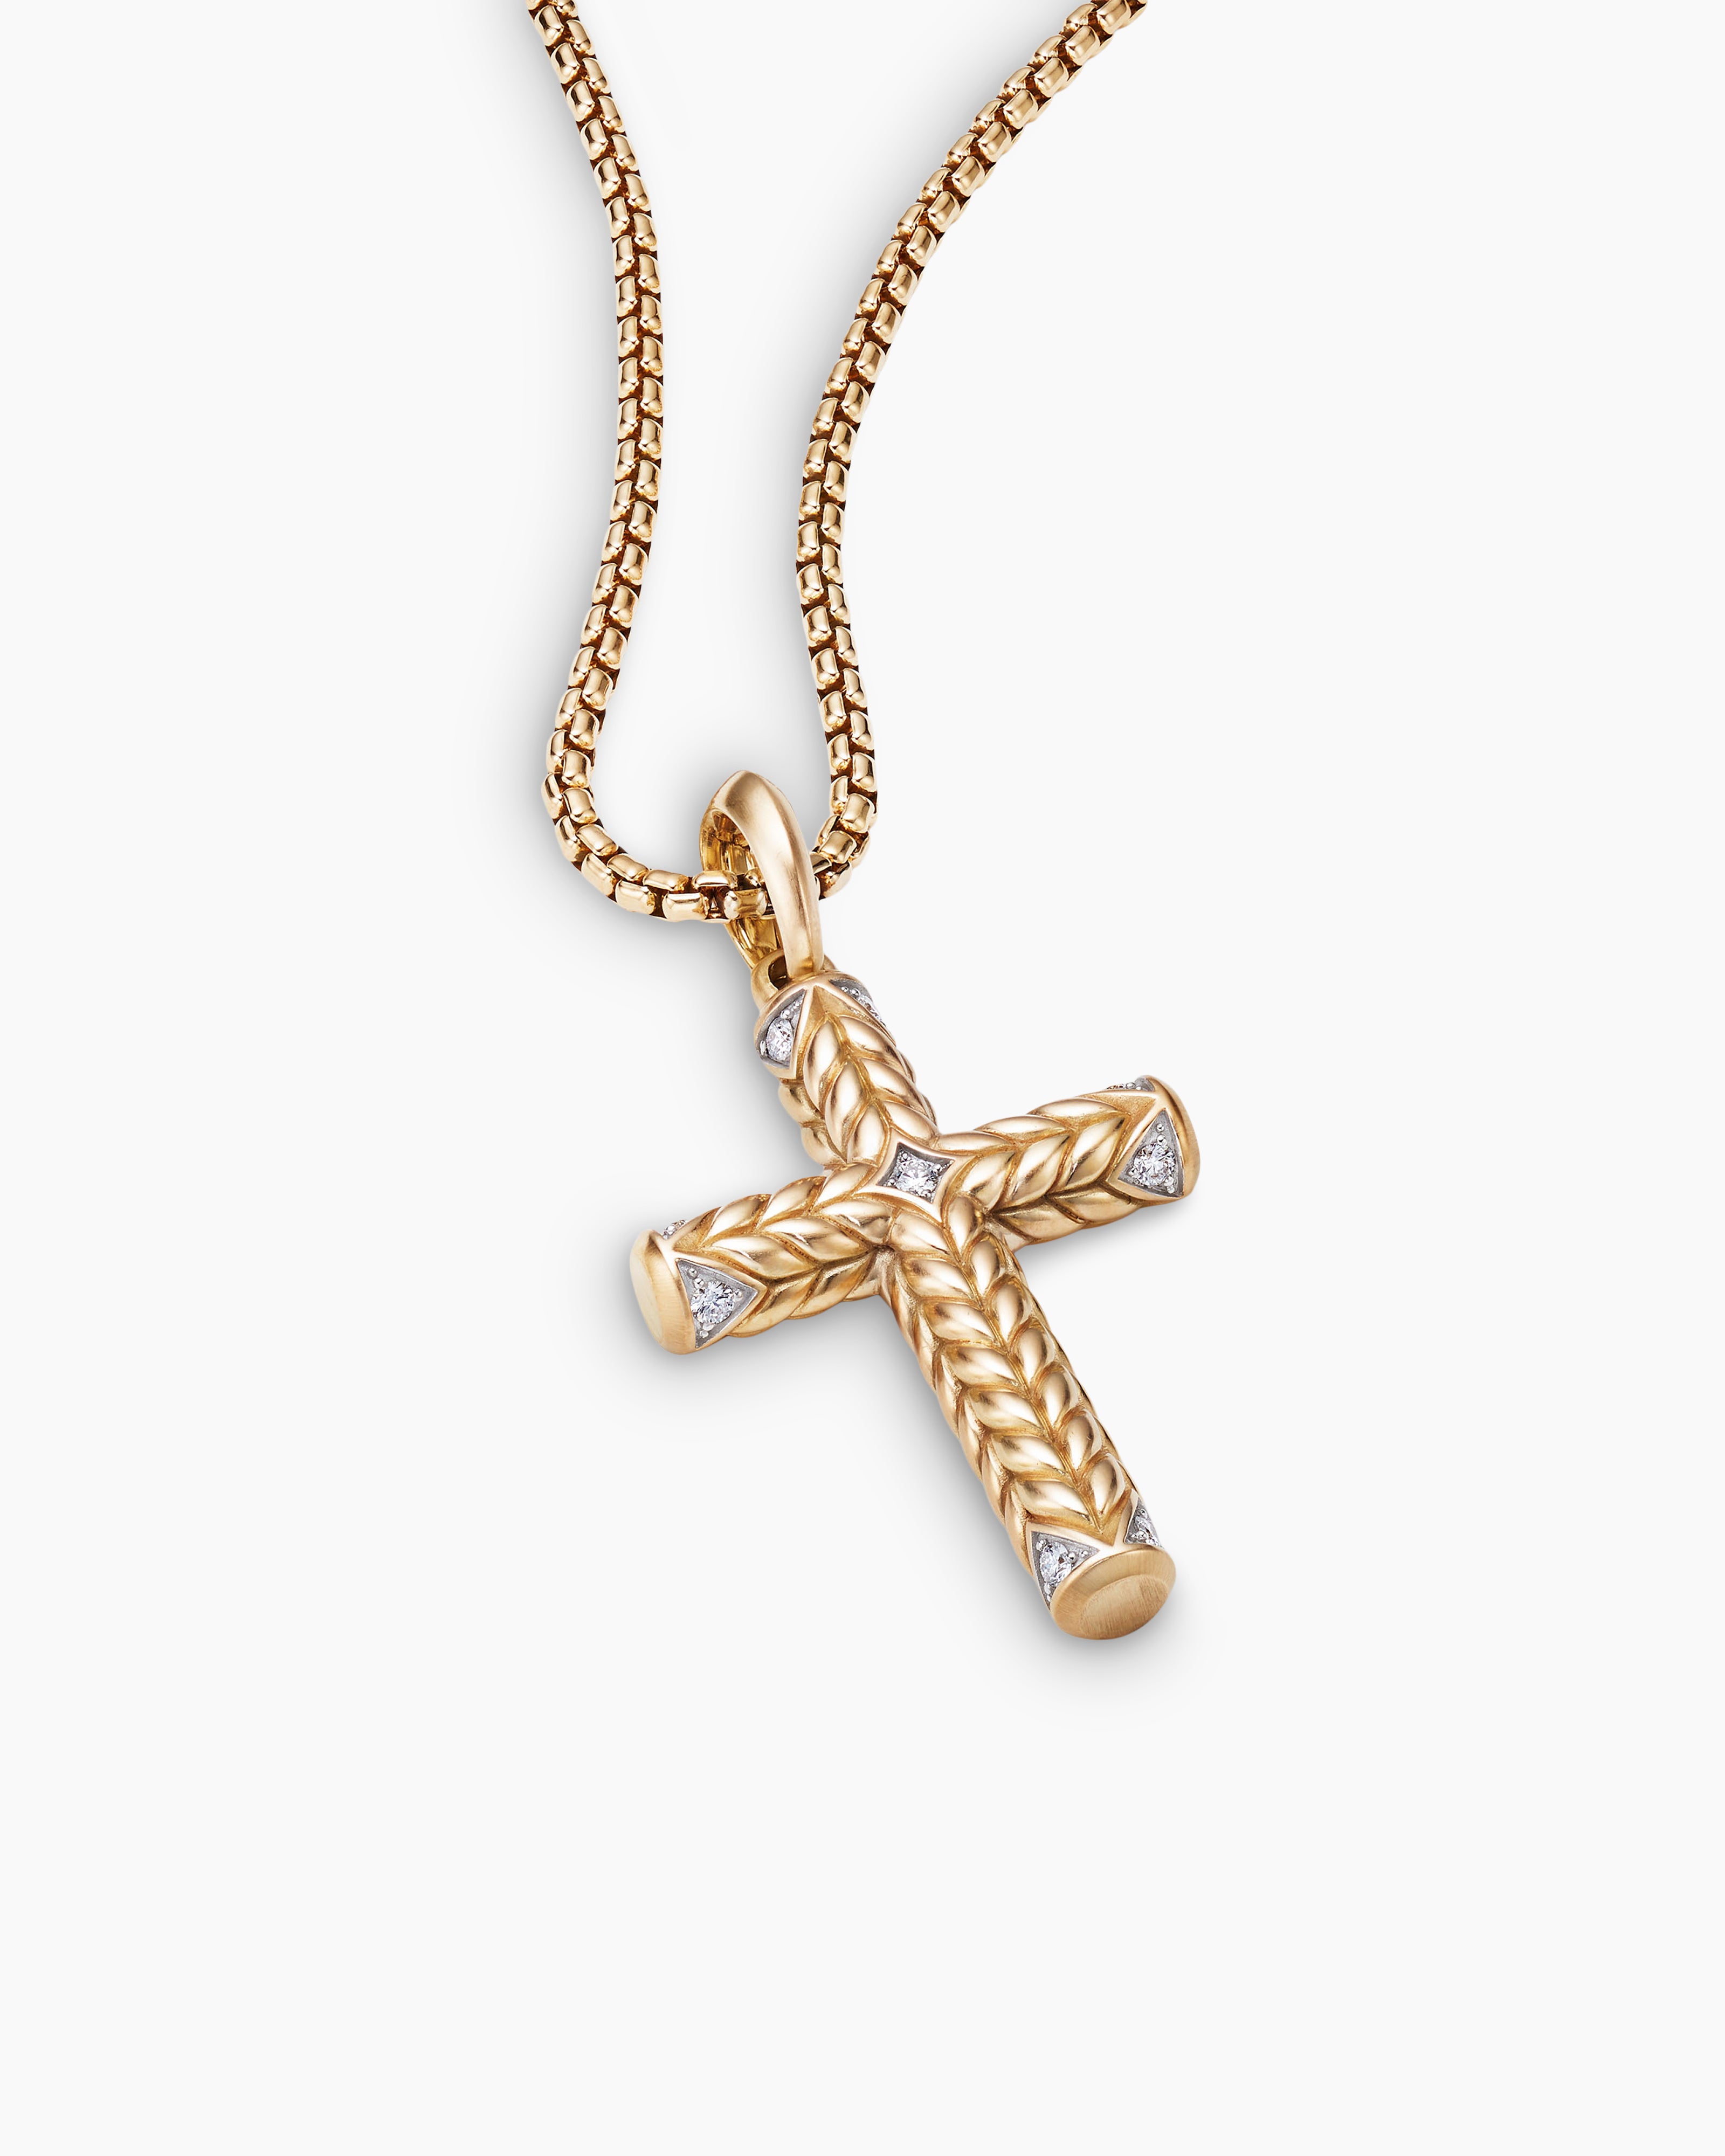 Chevron Sculpted Cross Pendant in 18K Yellow Gold with